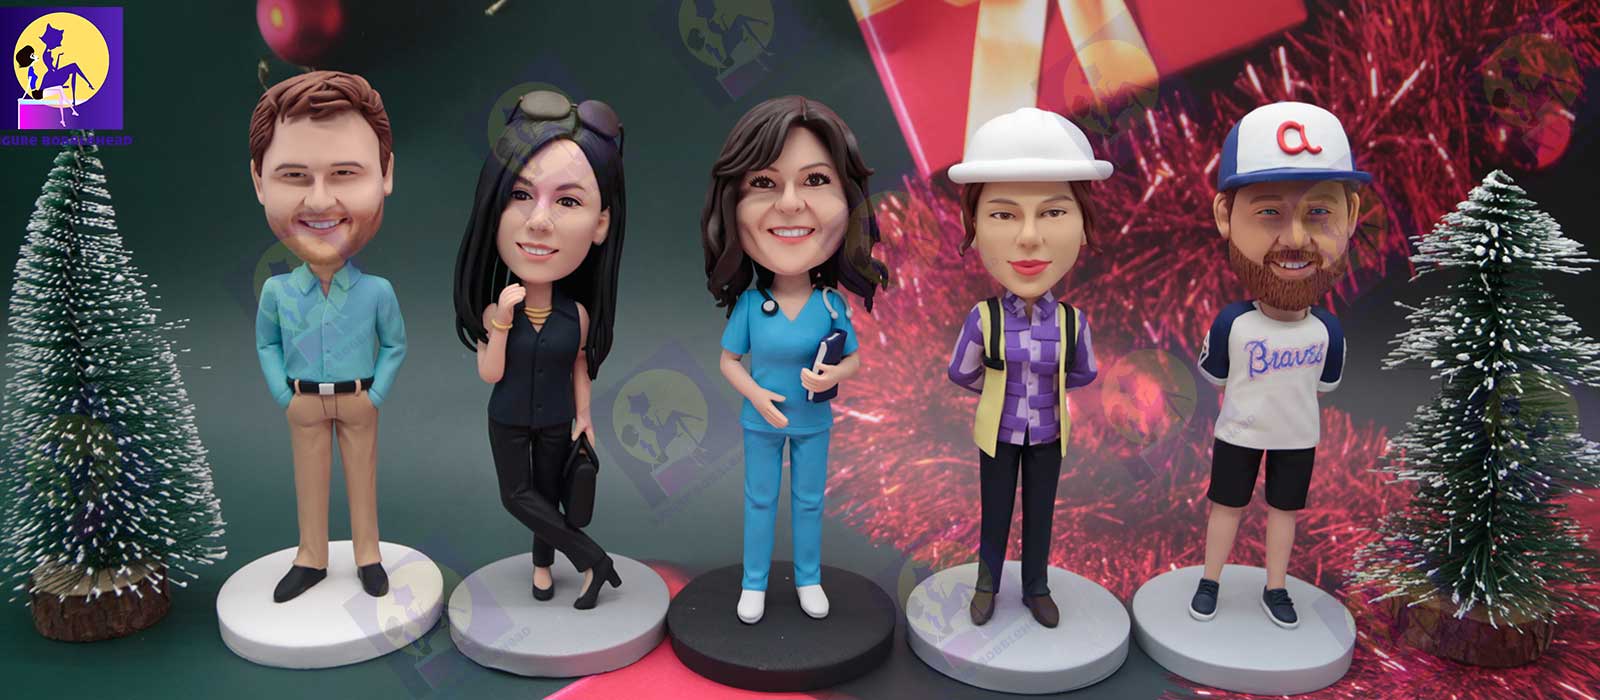 Why Are Bobblehead Dolls So Popular?